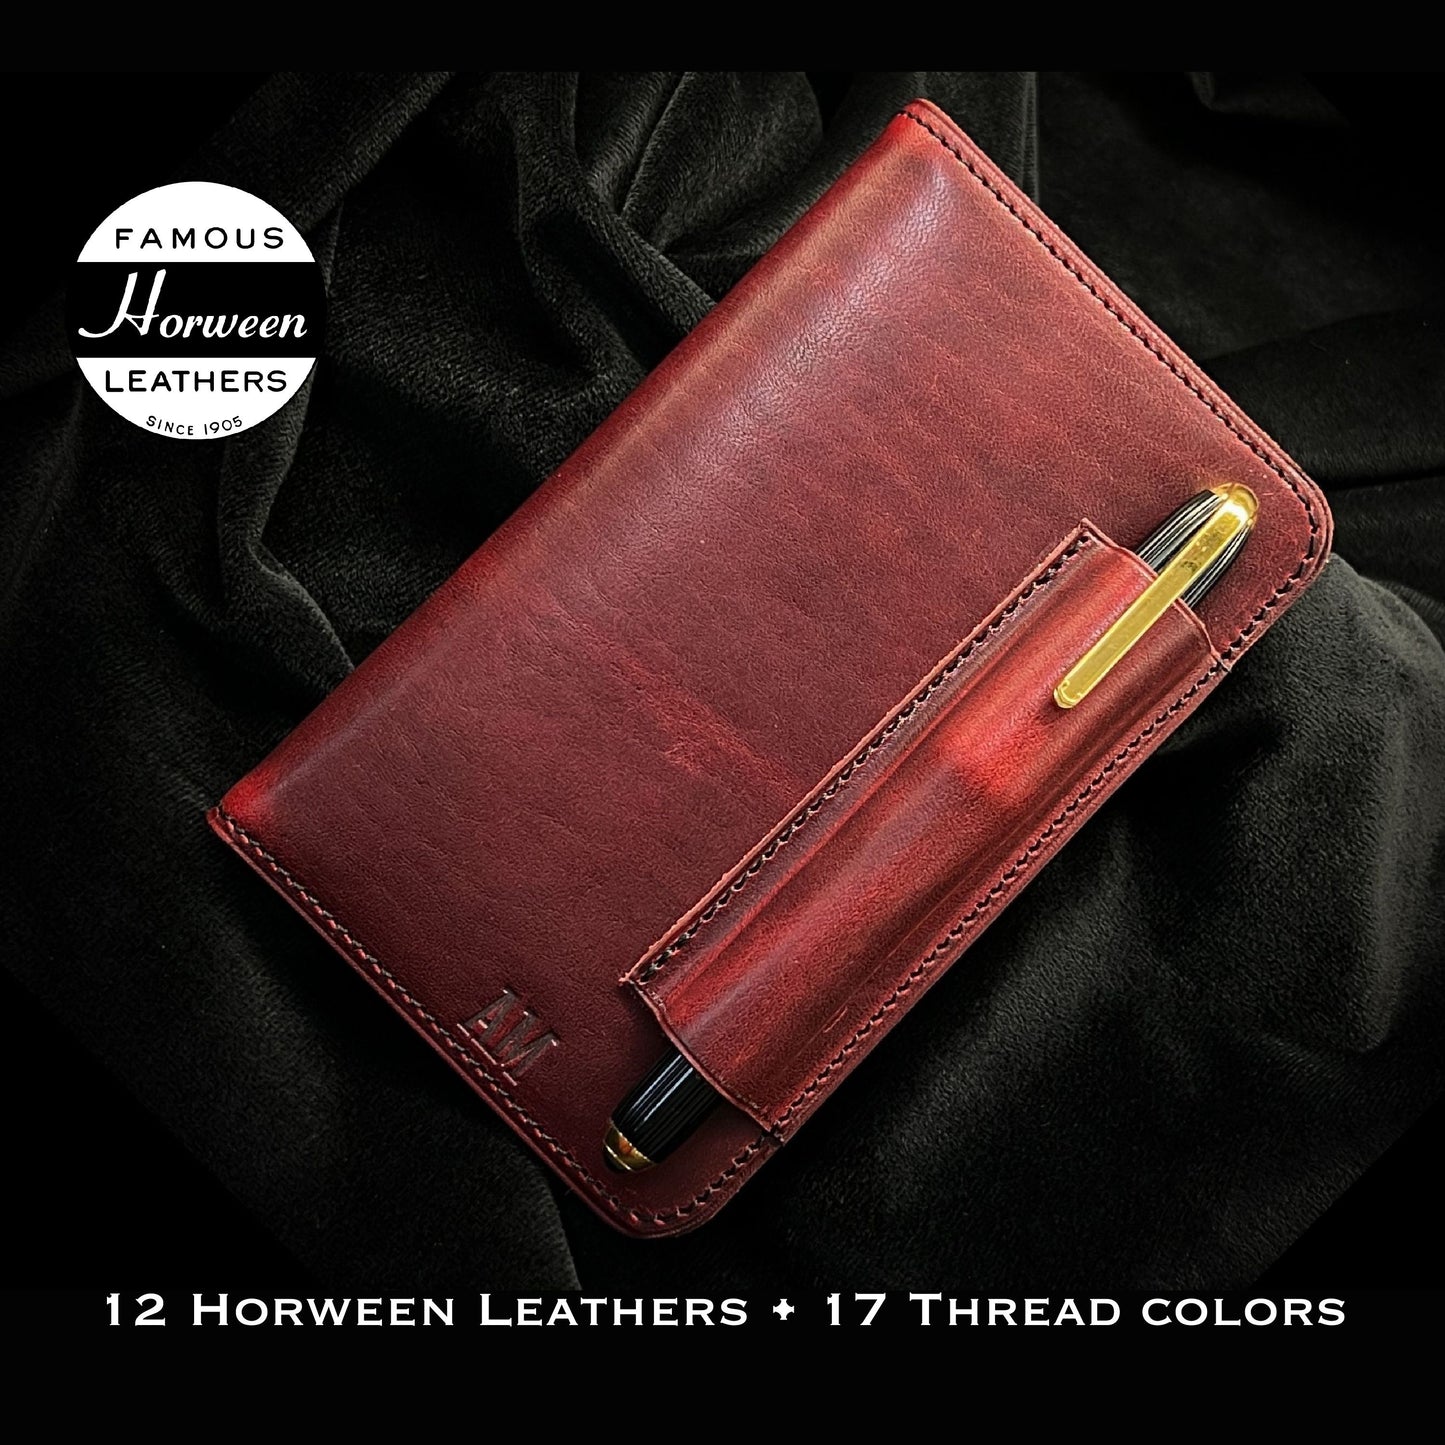 Compact Field Notes Cover in London Red Horween Leather | Handmade by Custom Leather and Pen